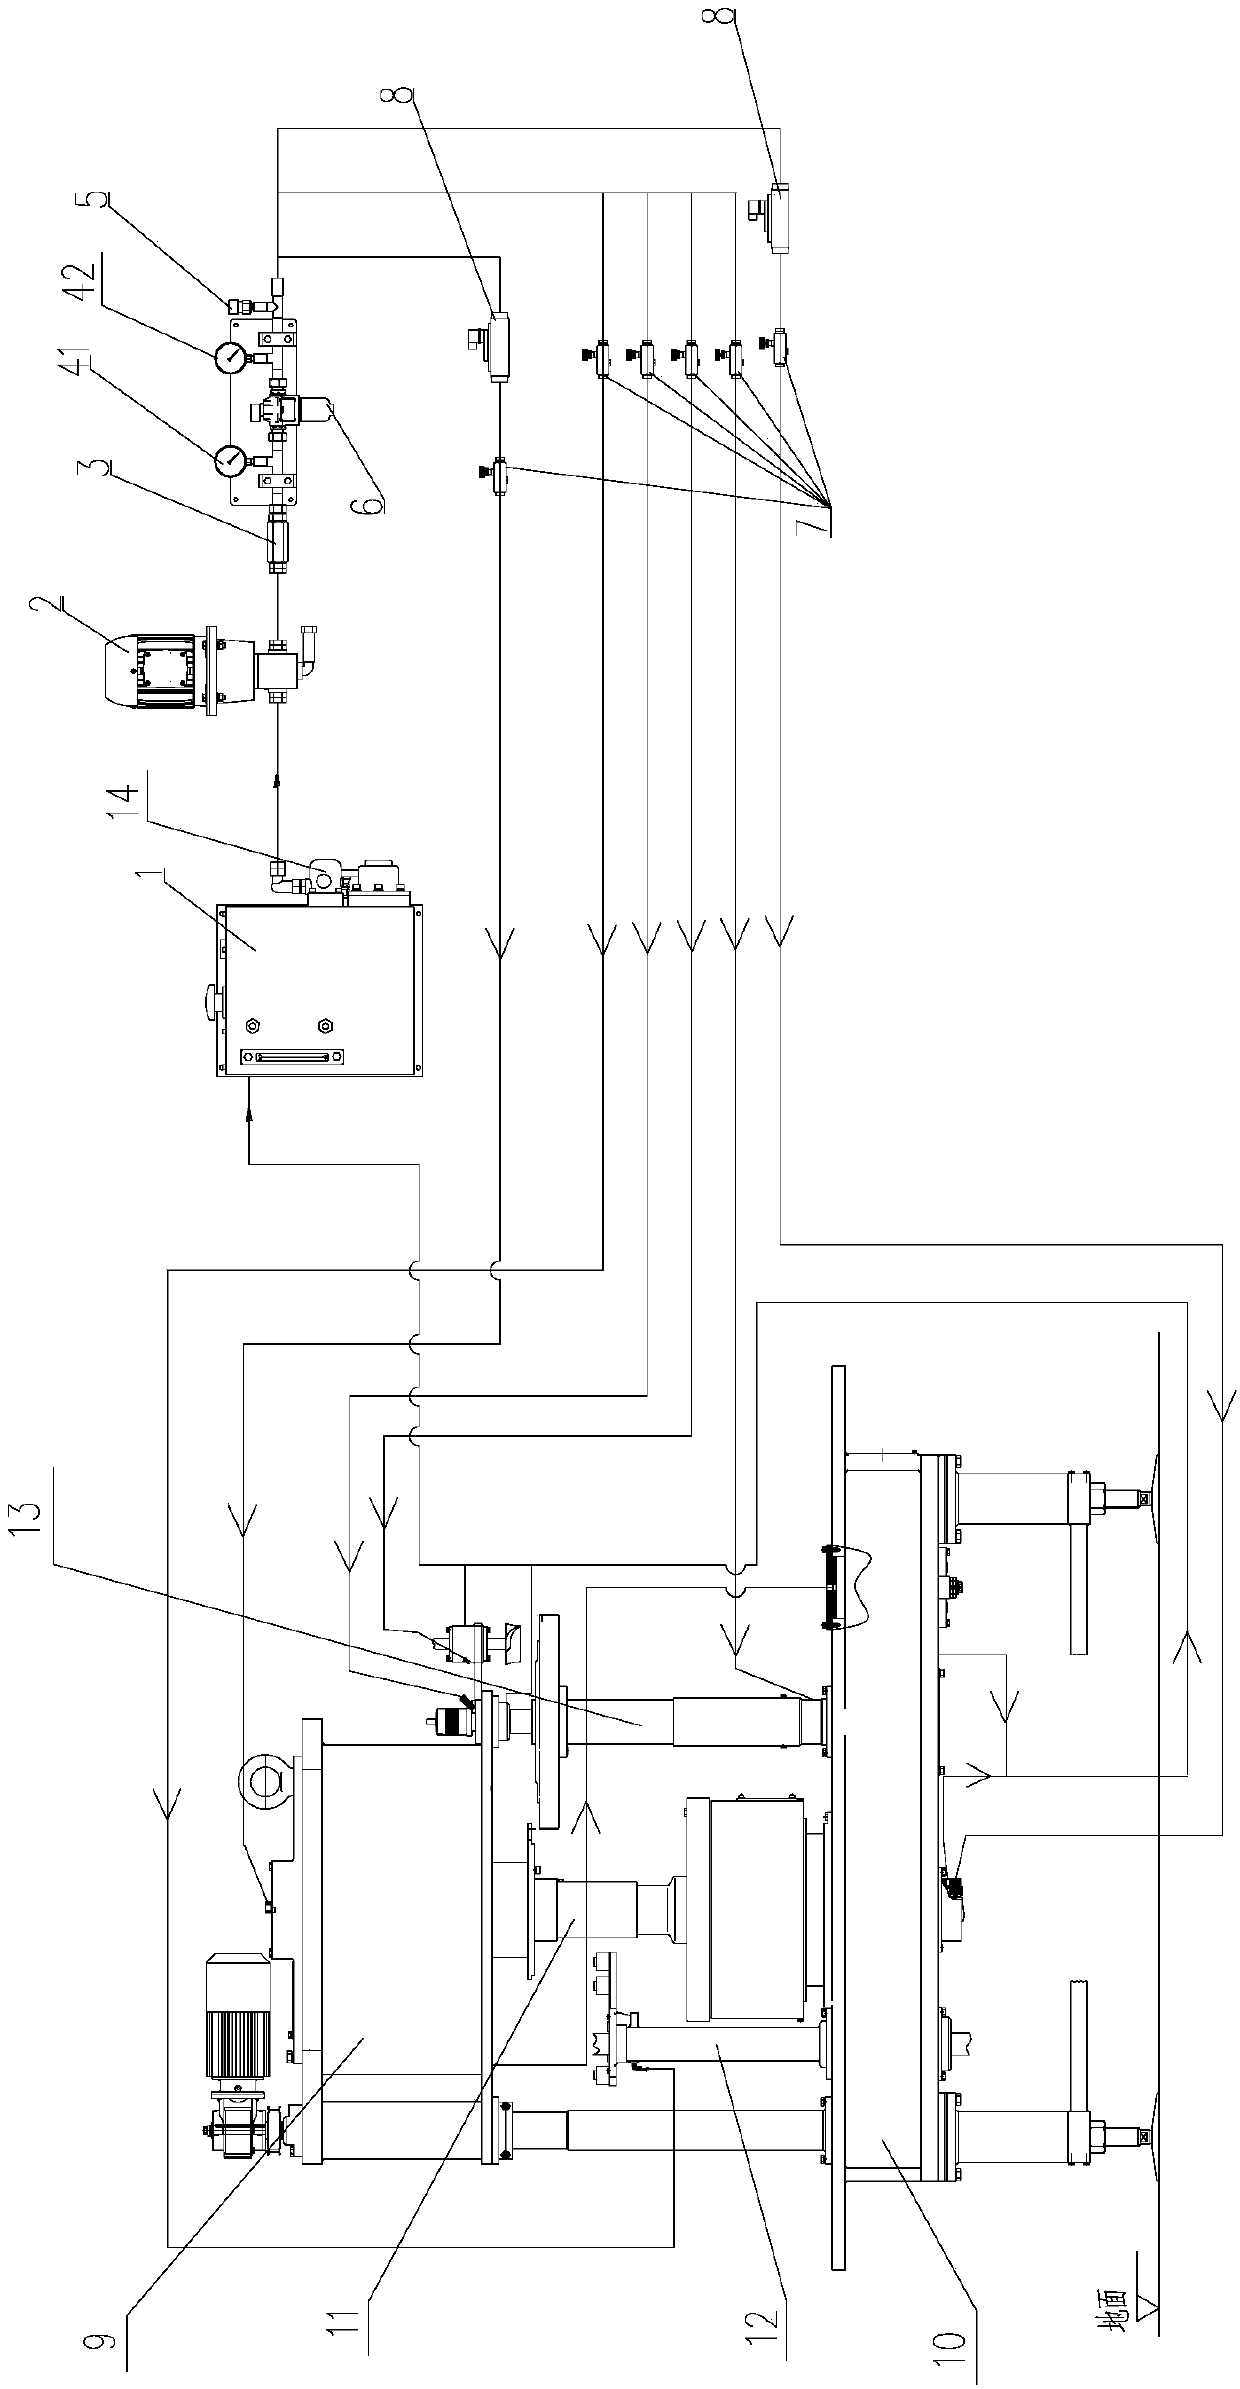 Fully-automatic thin oil lubrication system